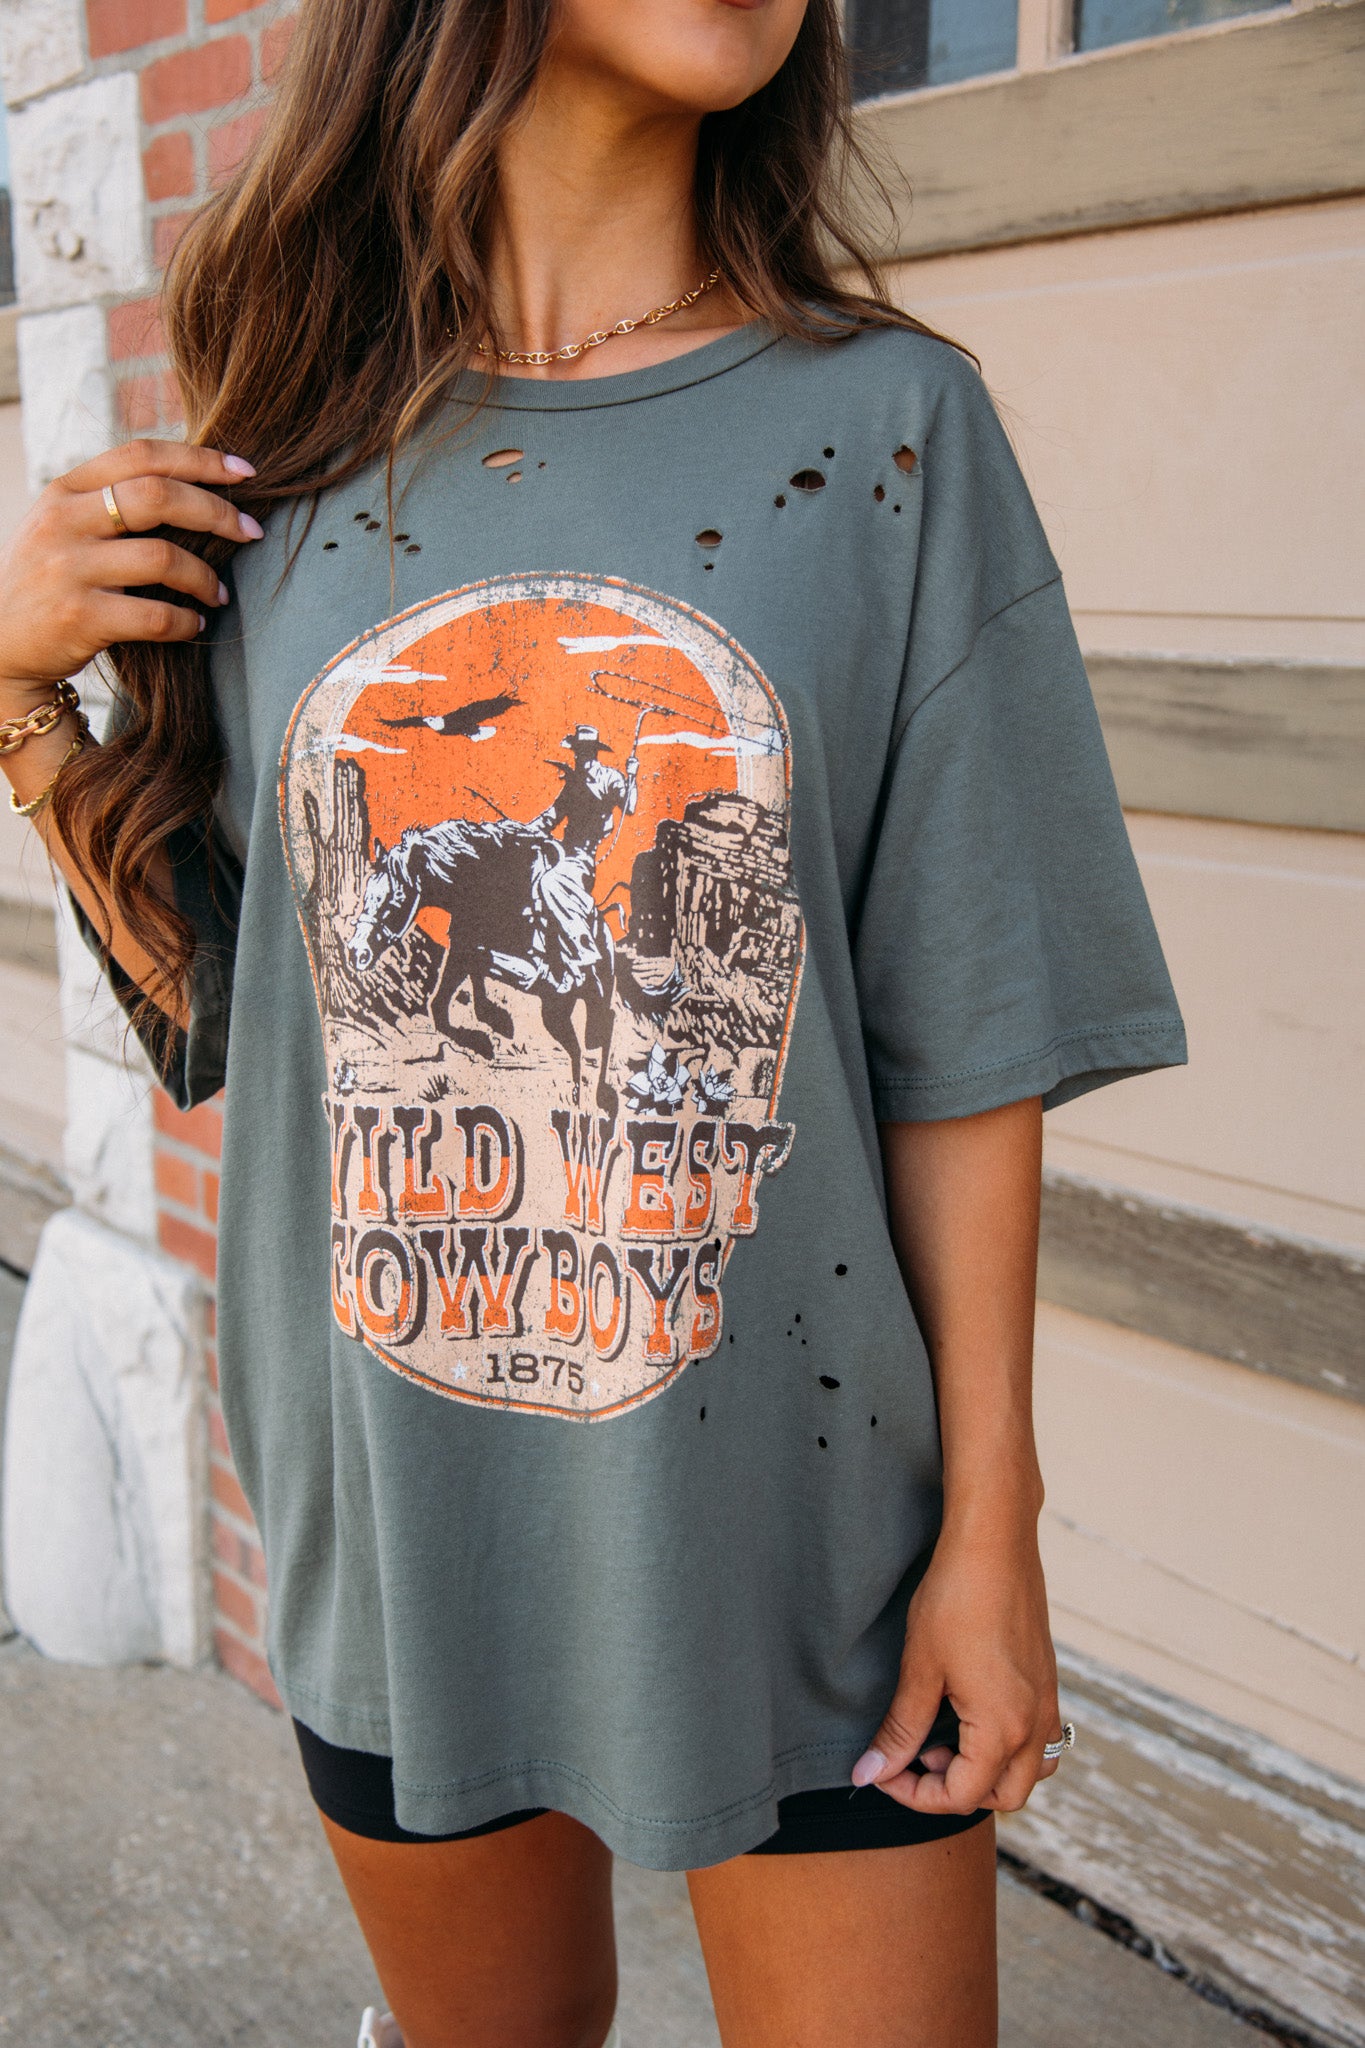 Load image into Gallery viewer, Distressed Wild West Cowboys Tee - Olive
